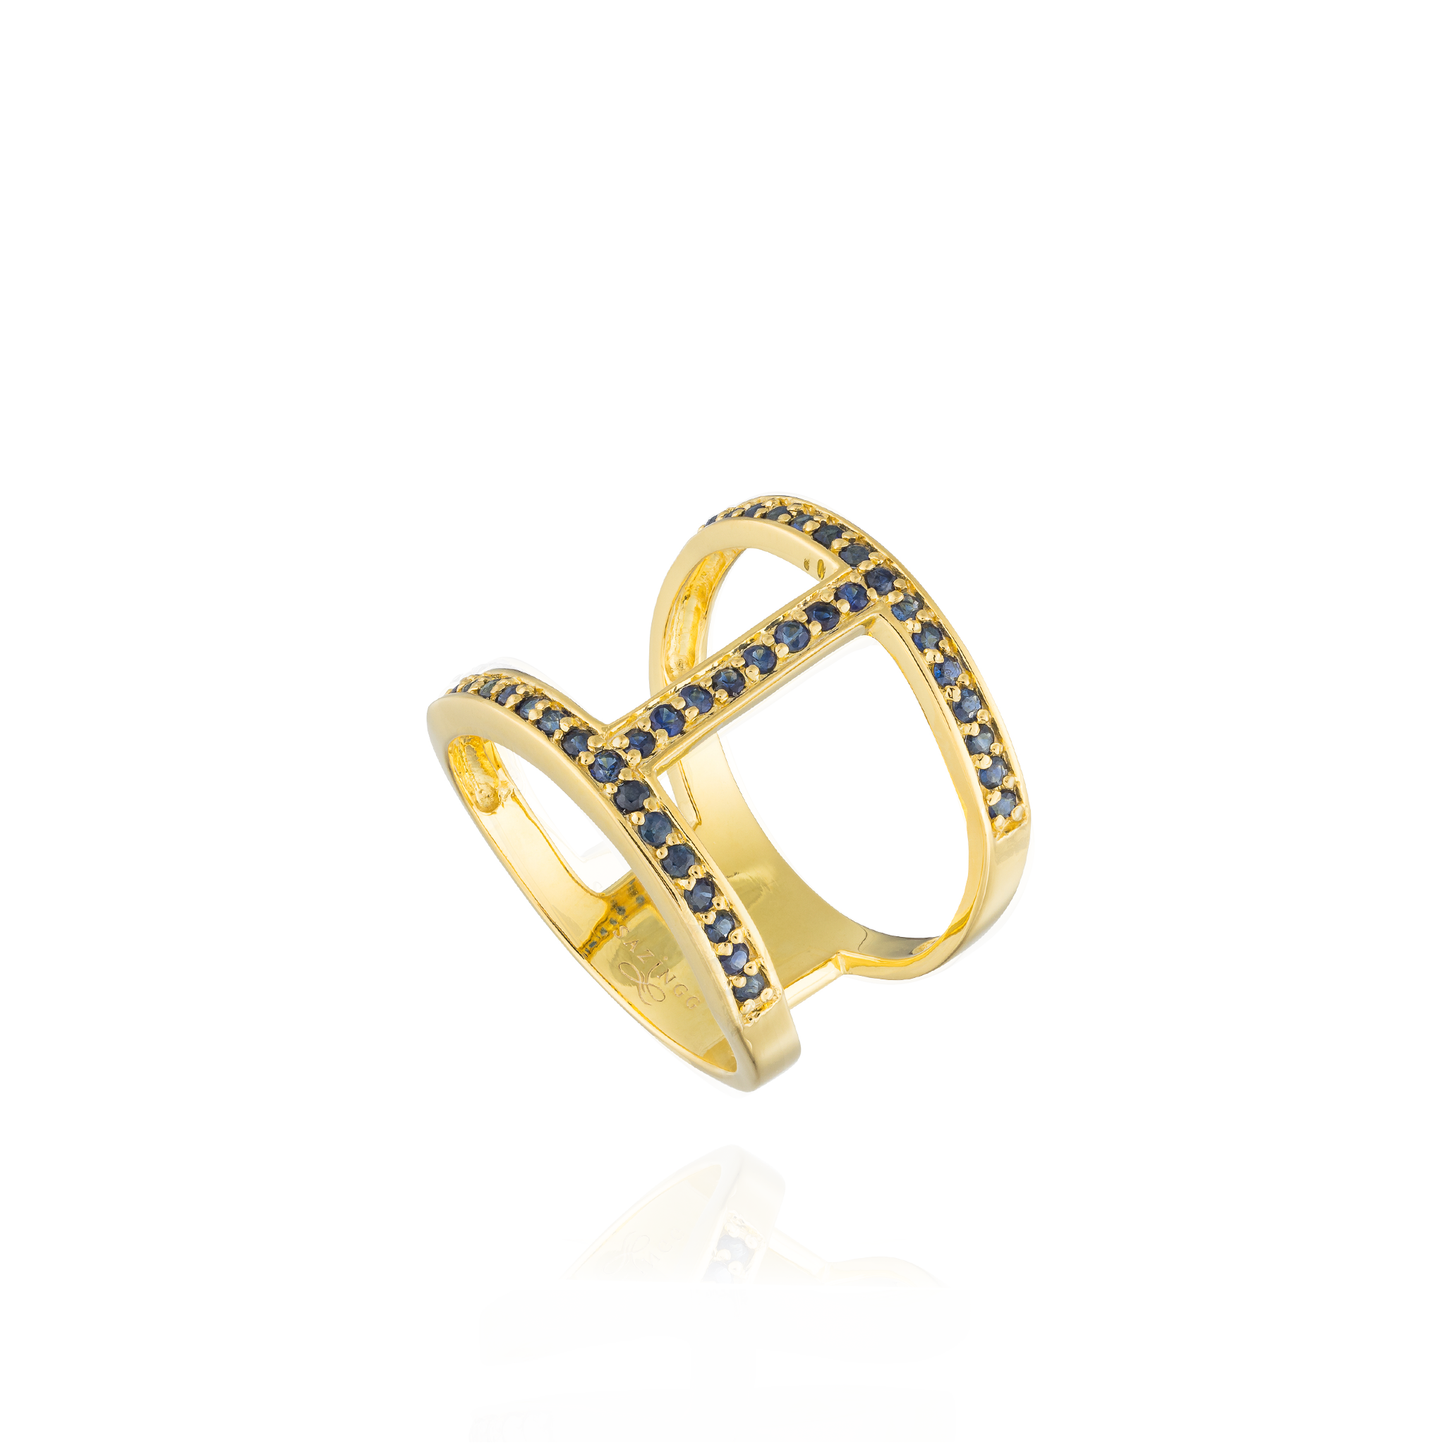 Edge Pavé 925 Silver Ring 18KT Yellow Plated with Blue Sapphire